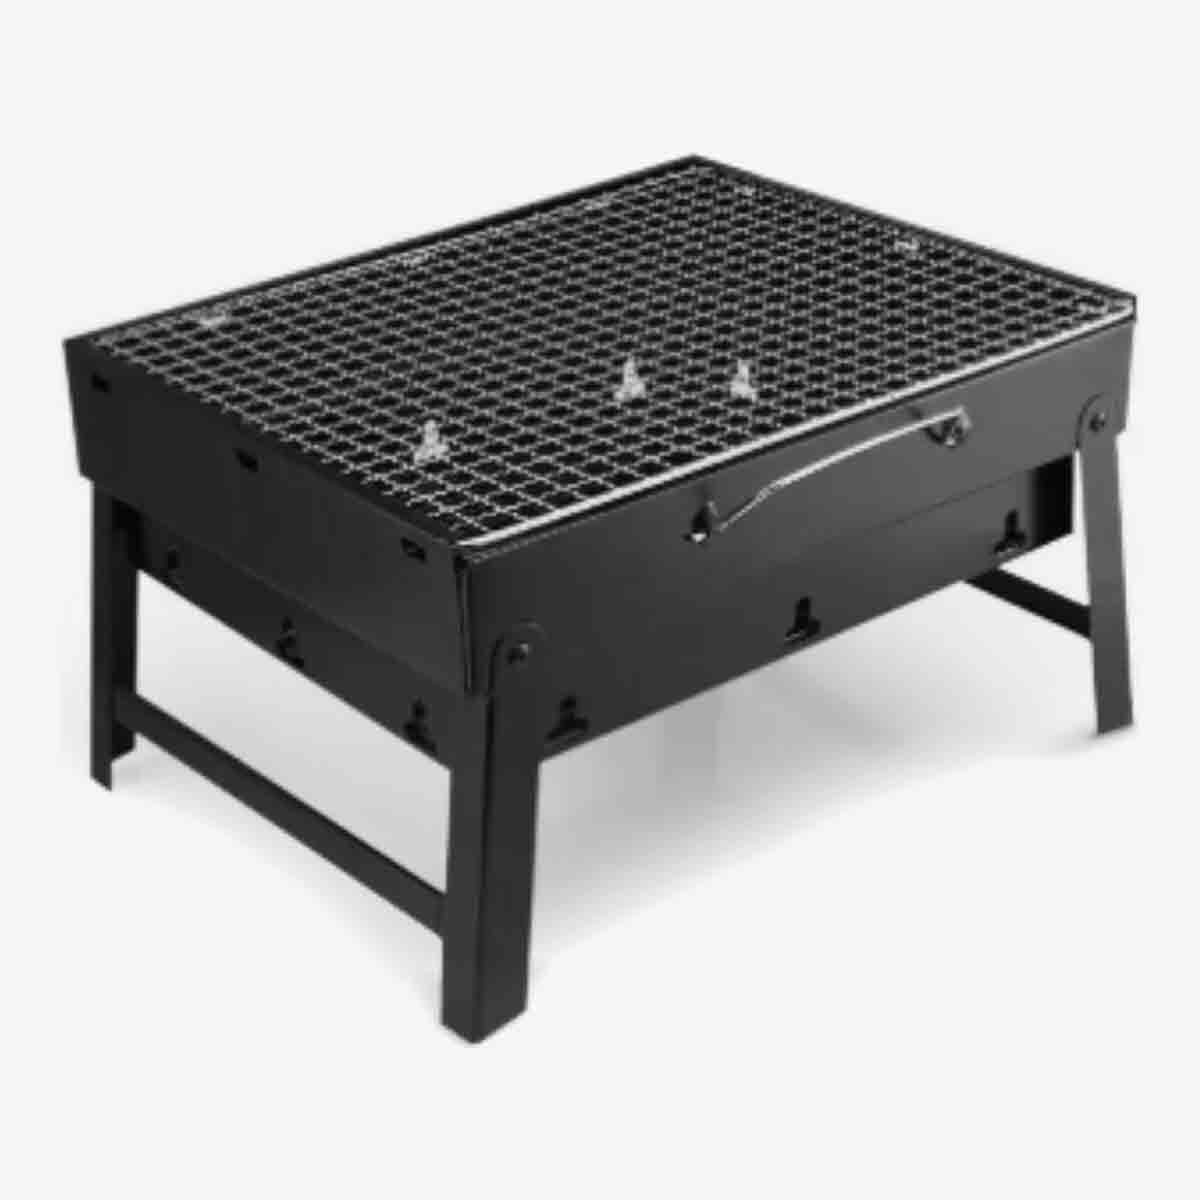 Steel Collapsible Barbeque Grill